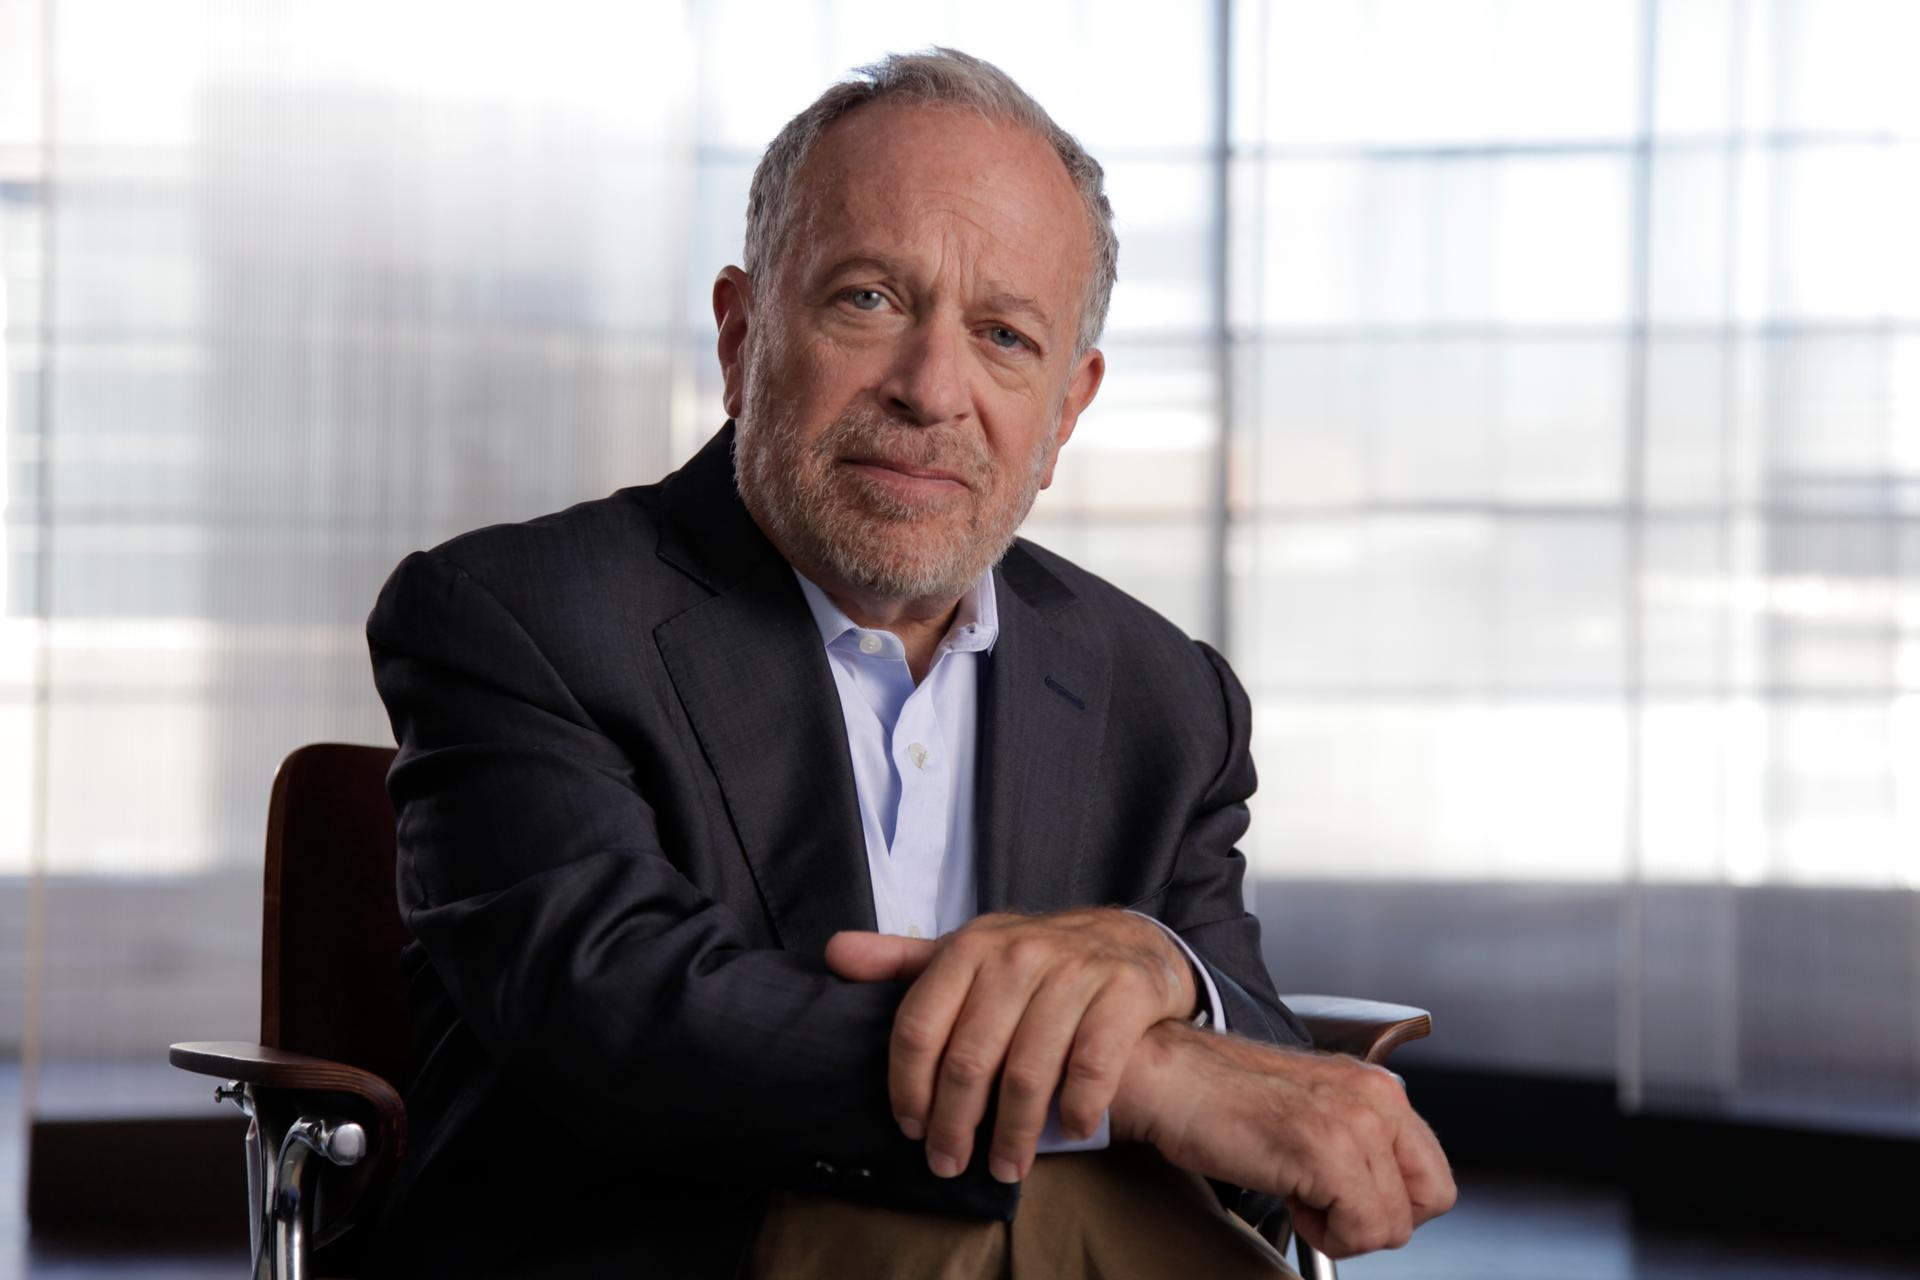 Former Secretary of Labor Robert Reich's new book is called Saving Capitalism: For the Many, Not the Few